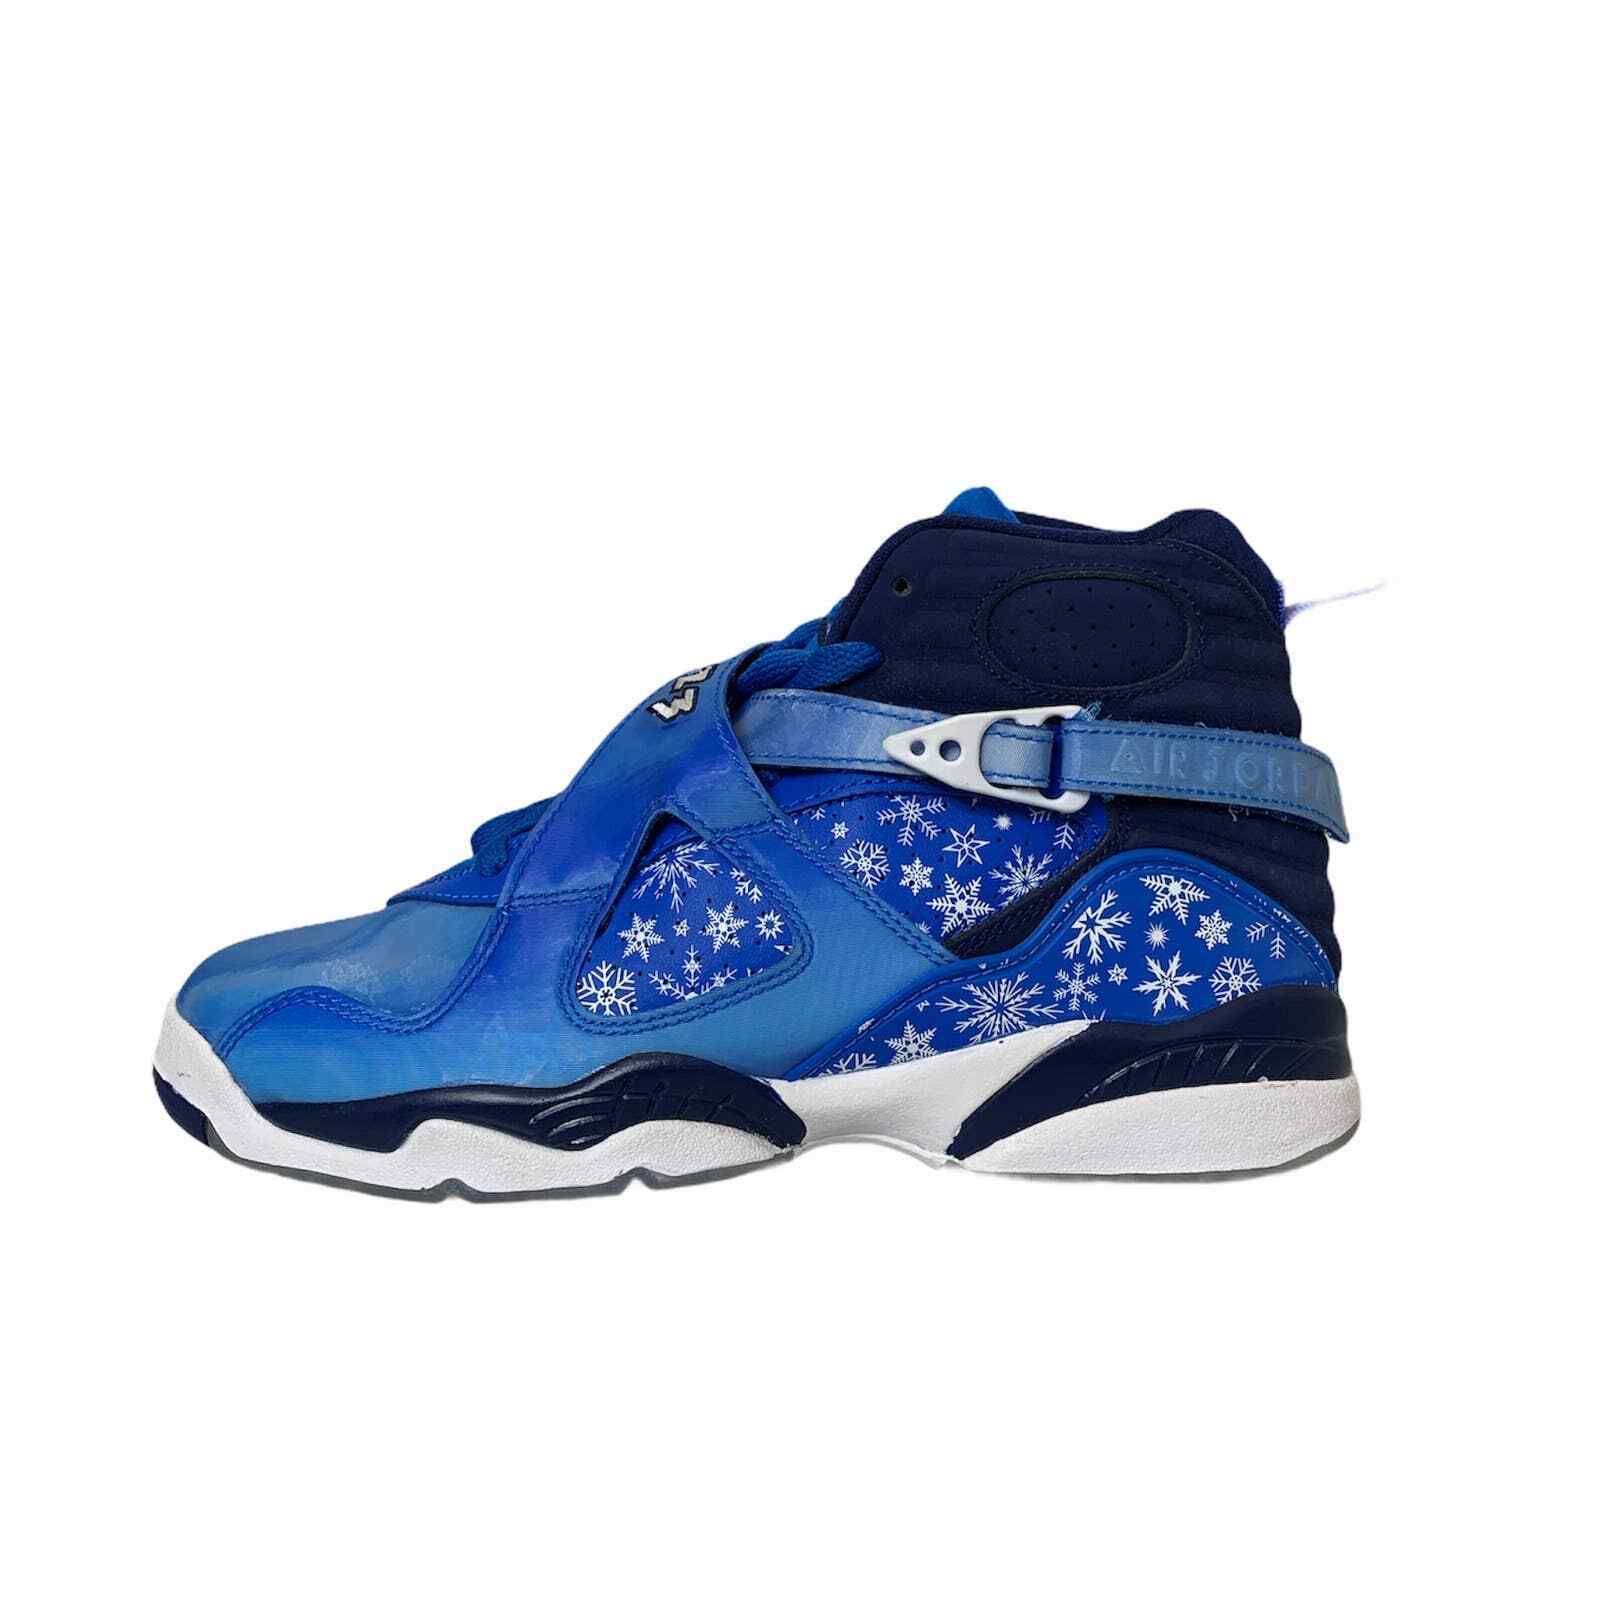 Primary image for Nike Air Jordan Retro 8 Snowflake Blue Basketball Shoes Size 6.5Y Youth Blizzard